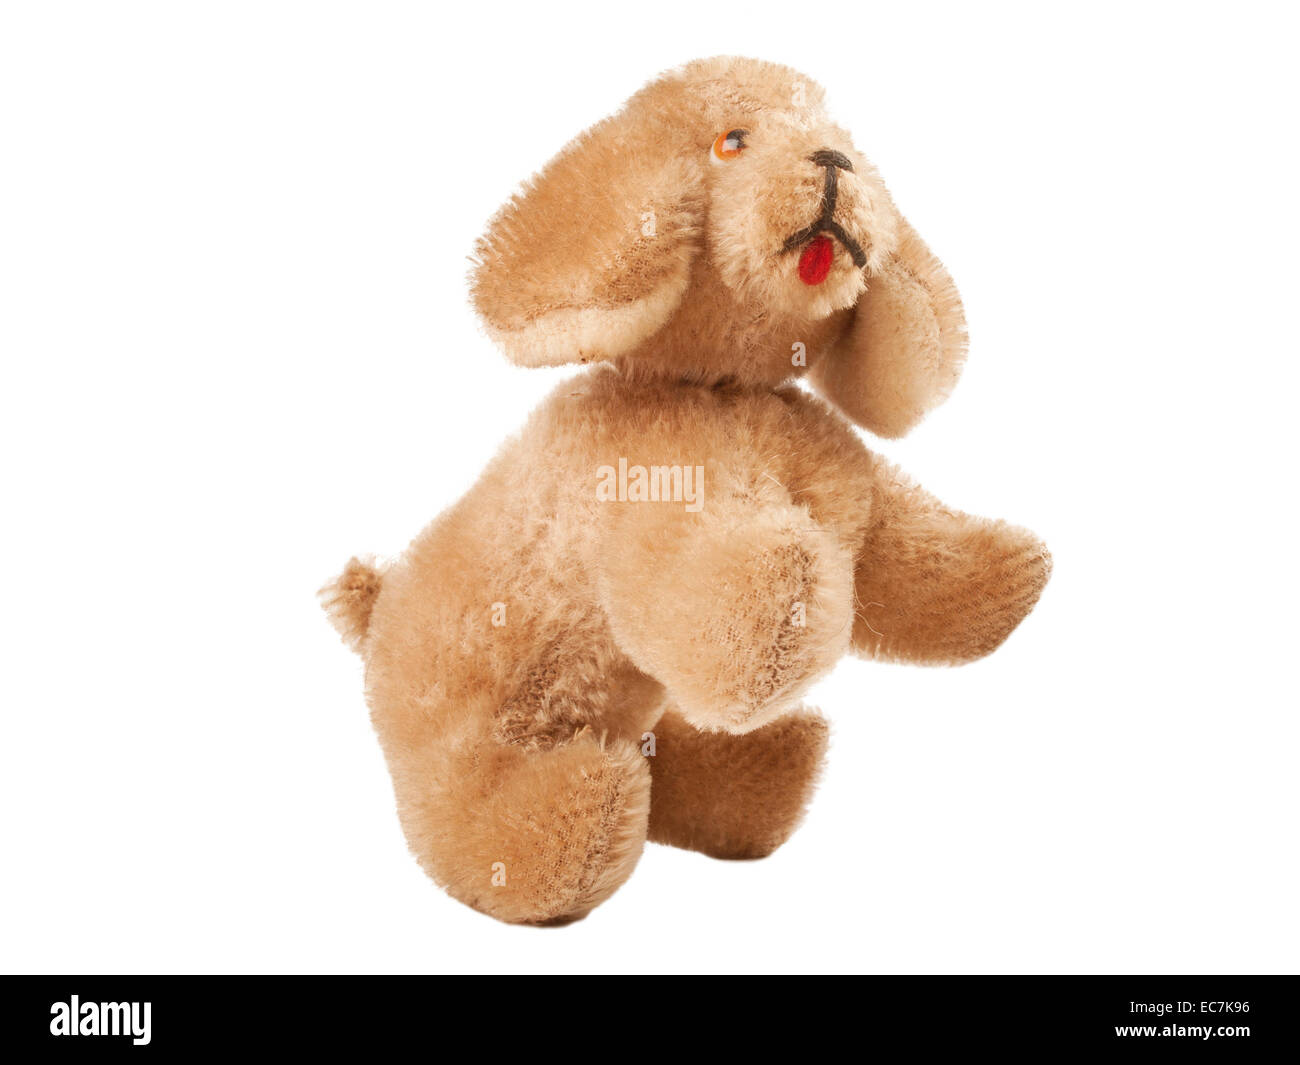 Vieux chien toy isolated on white background, studio shot Banque D'Images